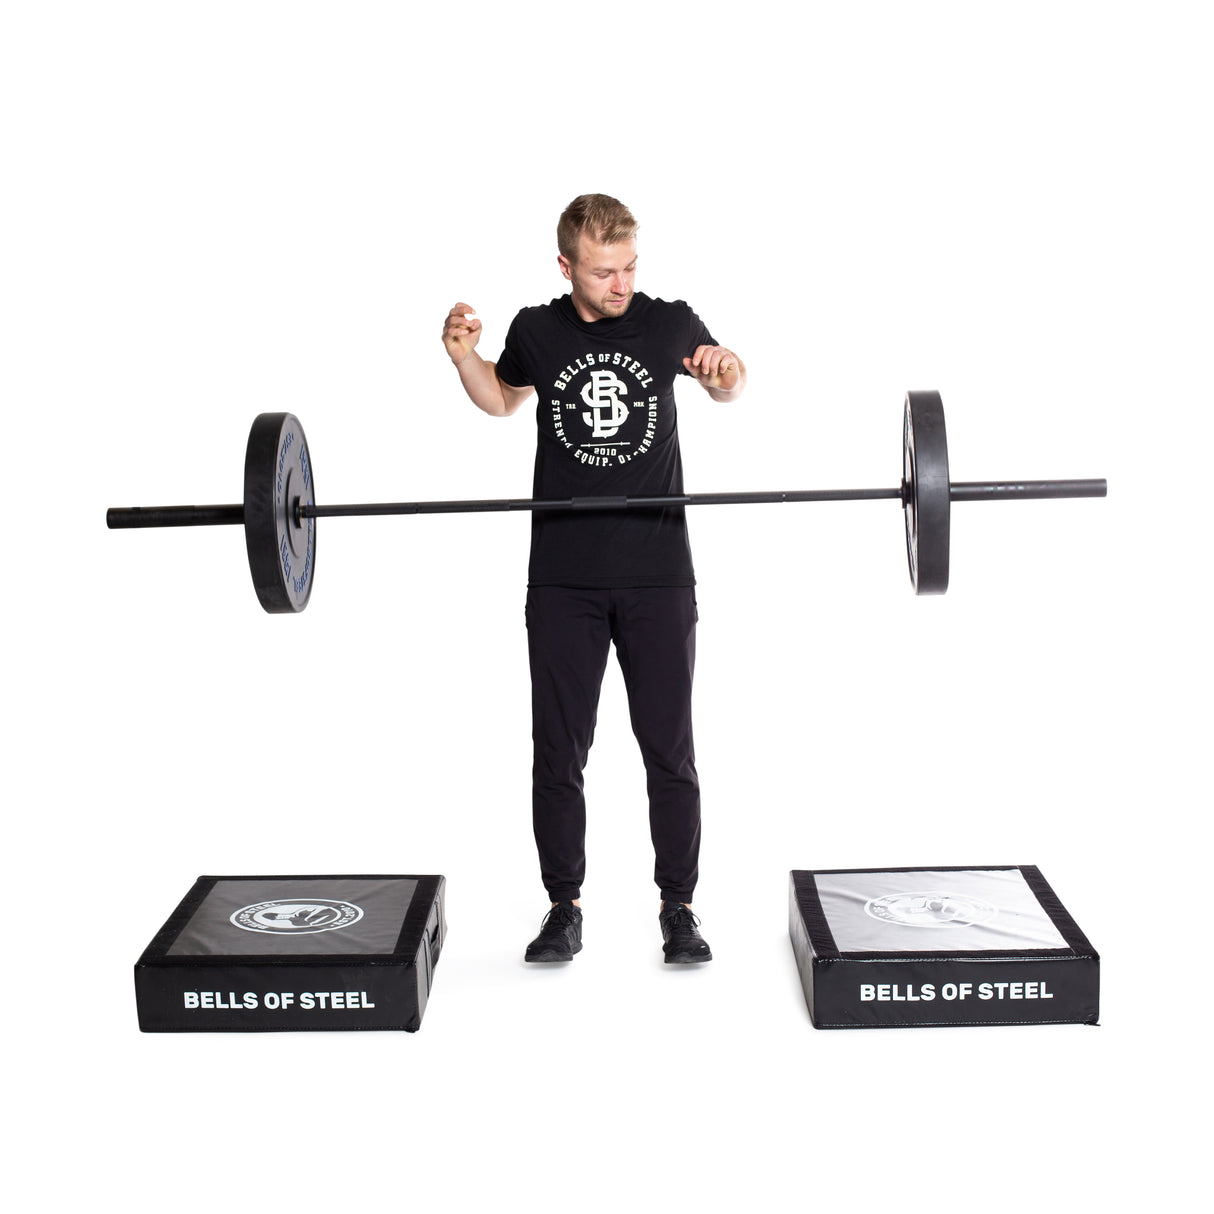 Male athlete dropping weights on a pair of Deadlift Pads